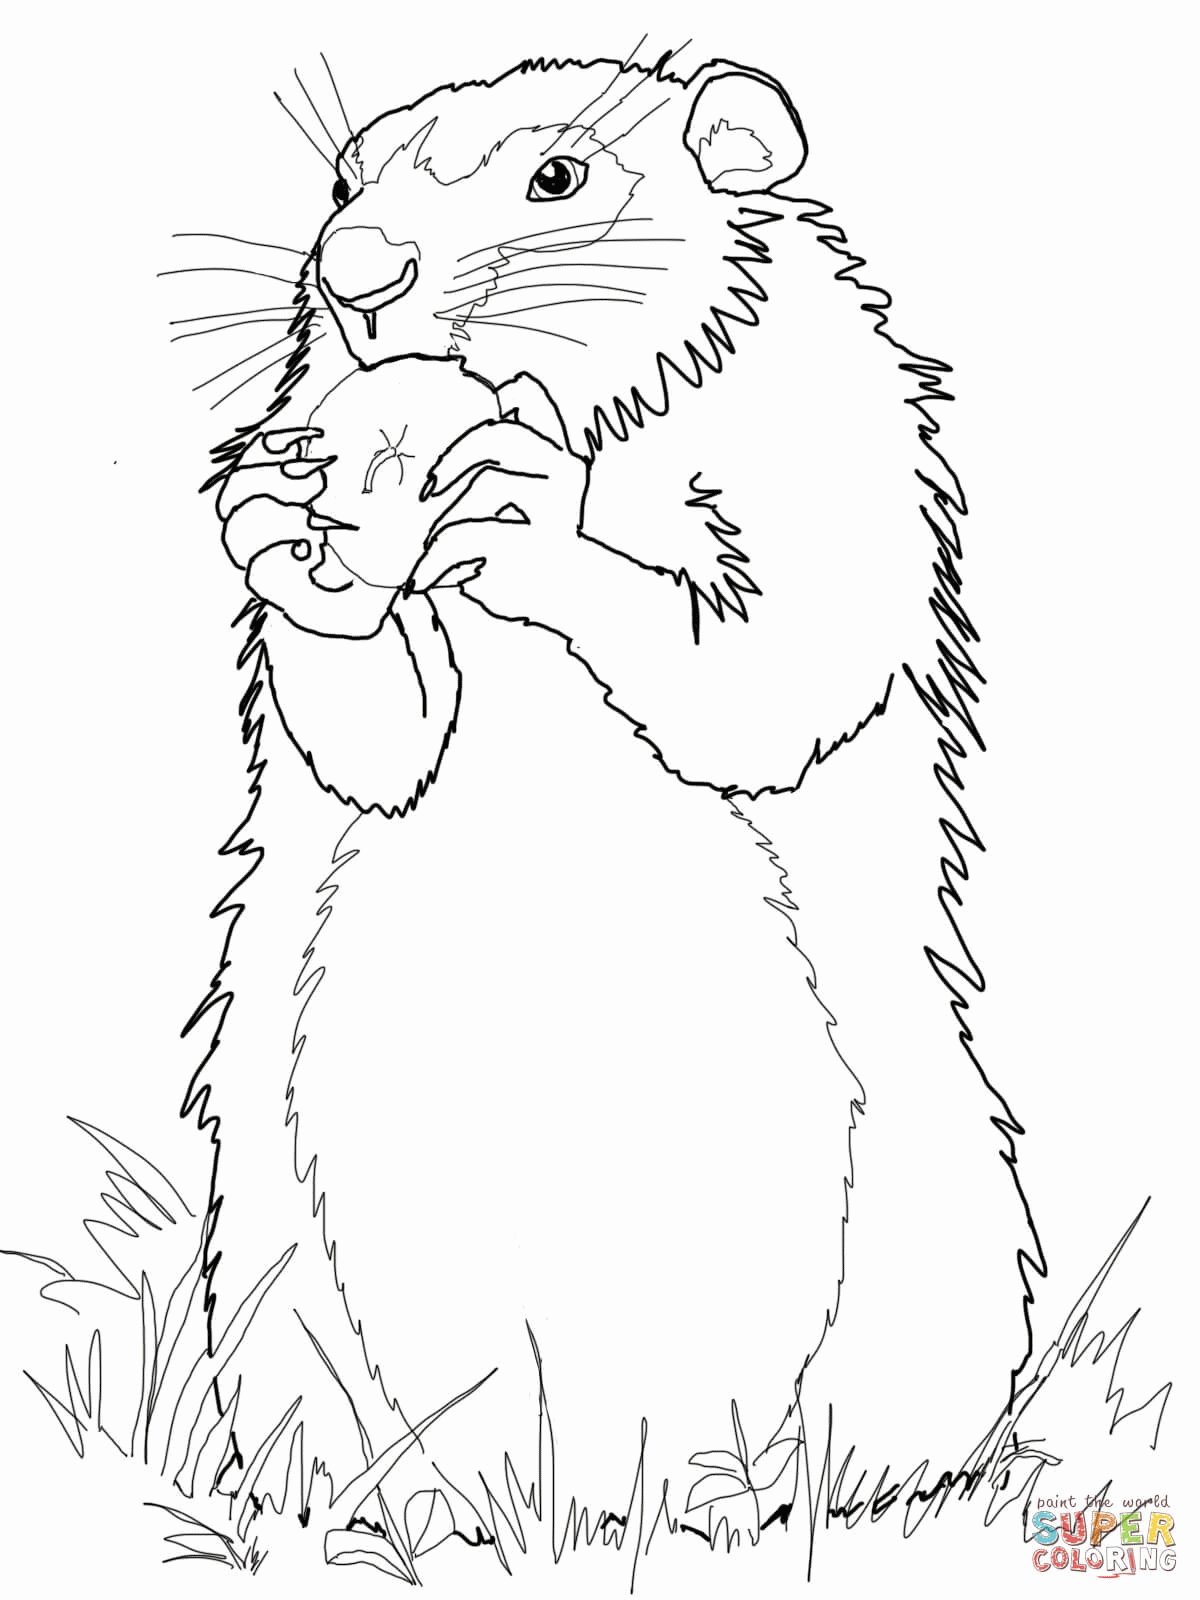 groundhog-day-coloring-page-0042-q1